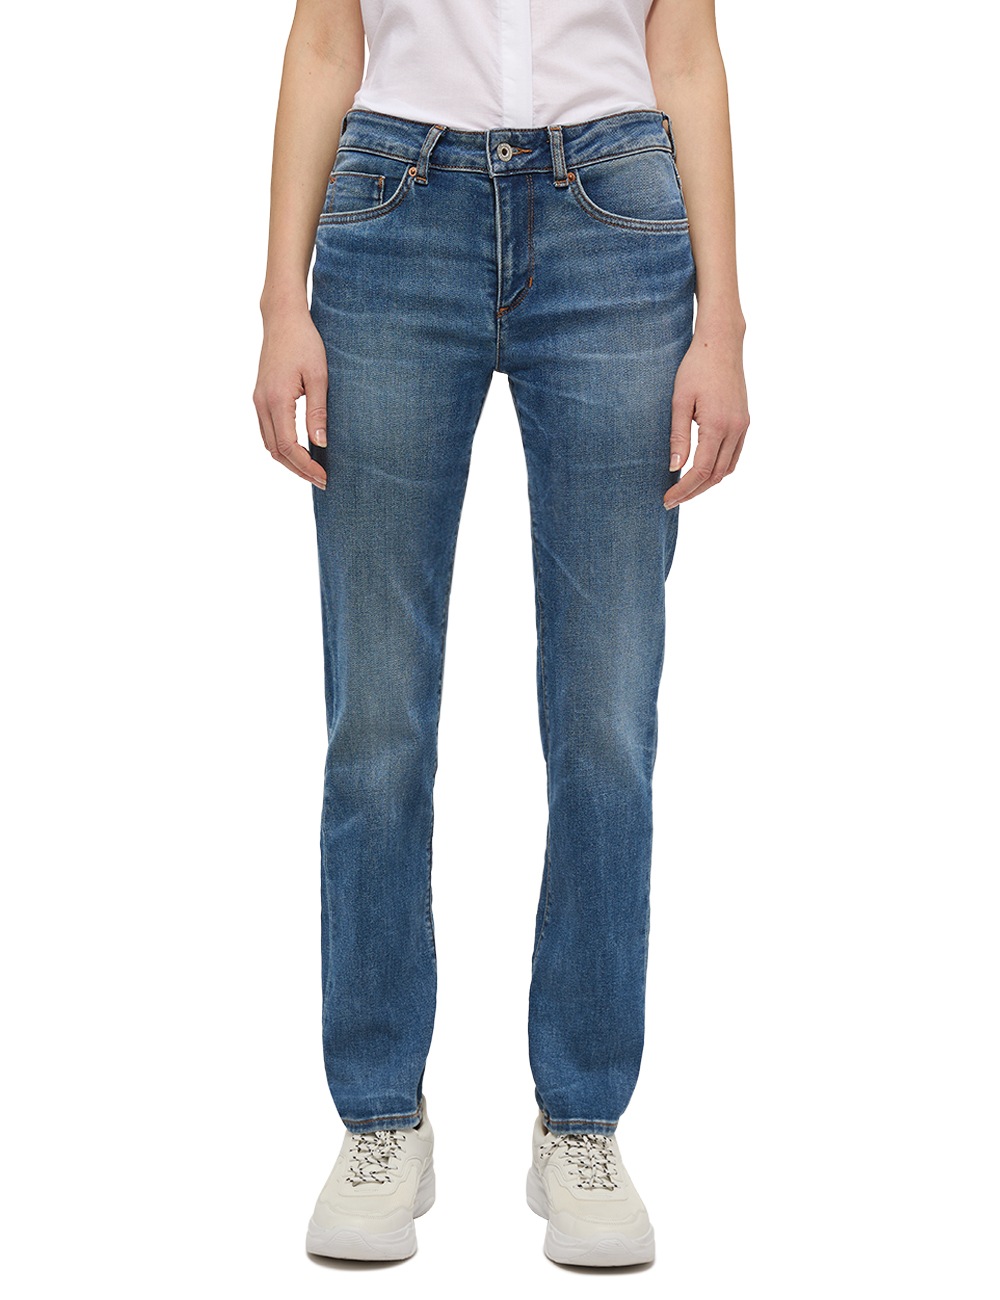 MUSTANG Slim-fit-Jeans »Style online Shelby kaufen Slim«